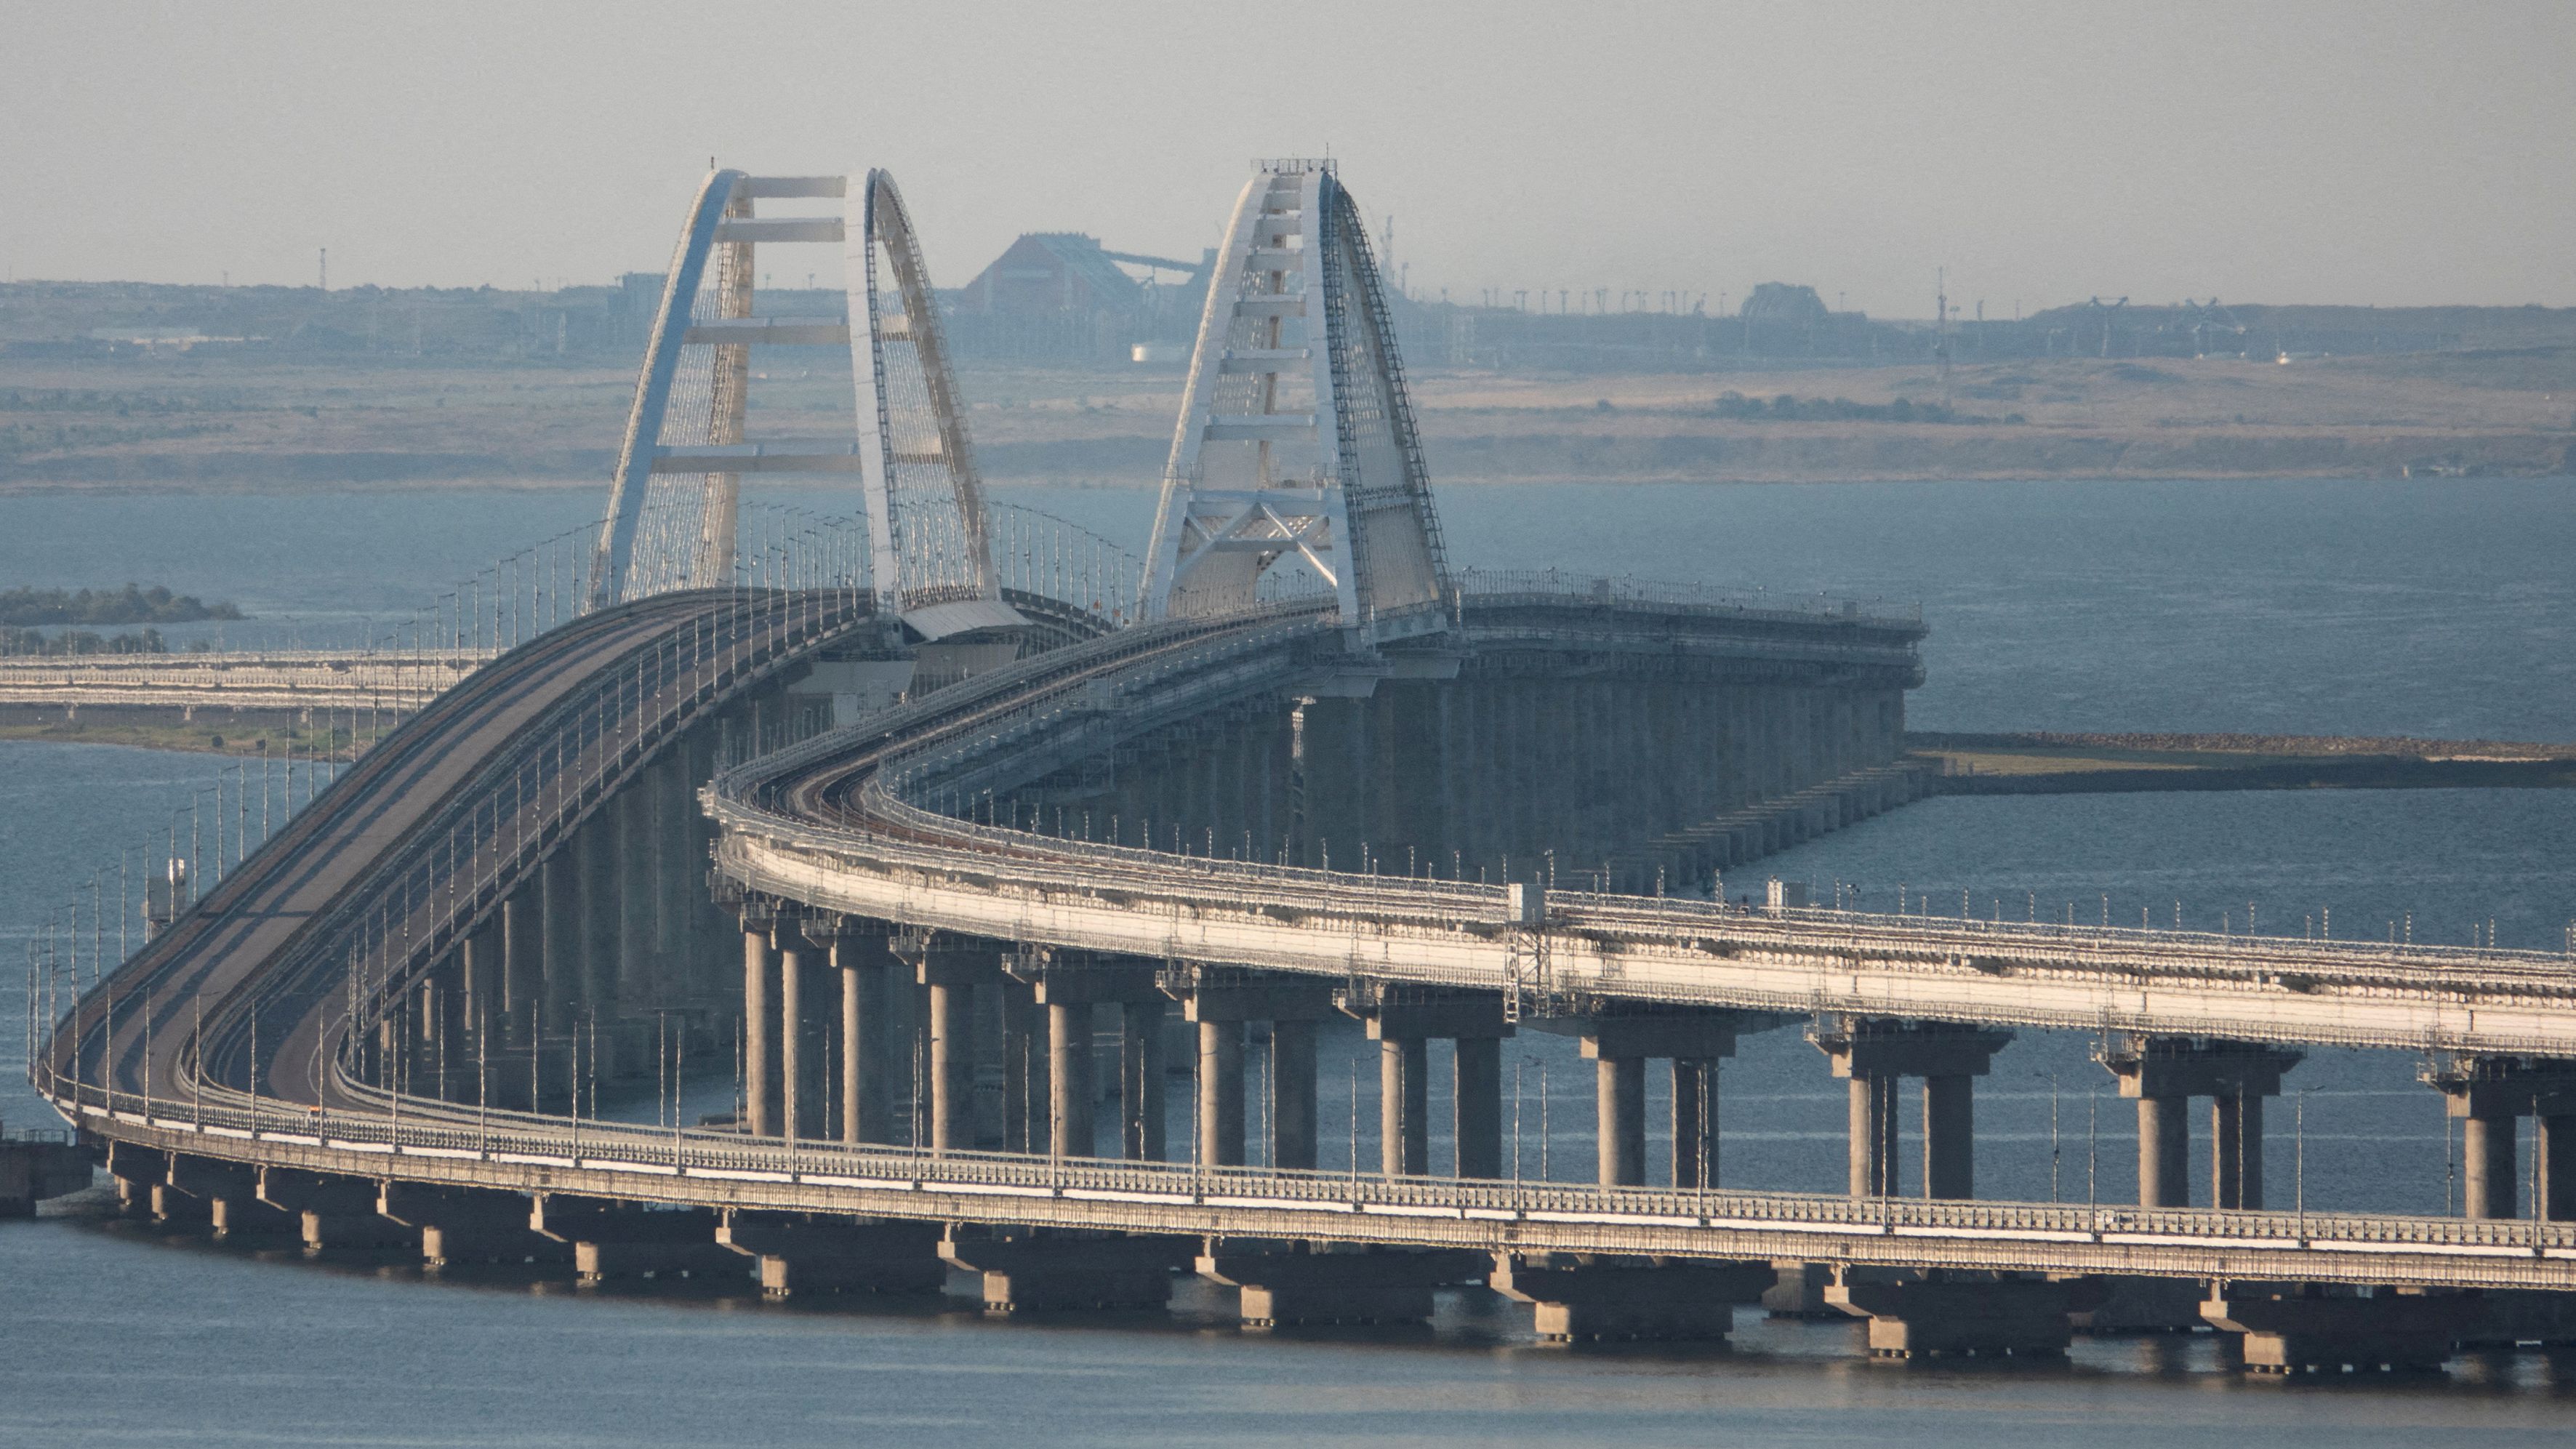 The bridge connects the Russian mainland with the peninsula across the Kerch Strait. /Stringer/Reuters